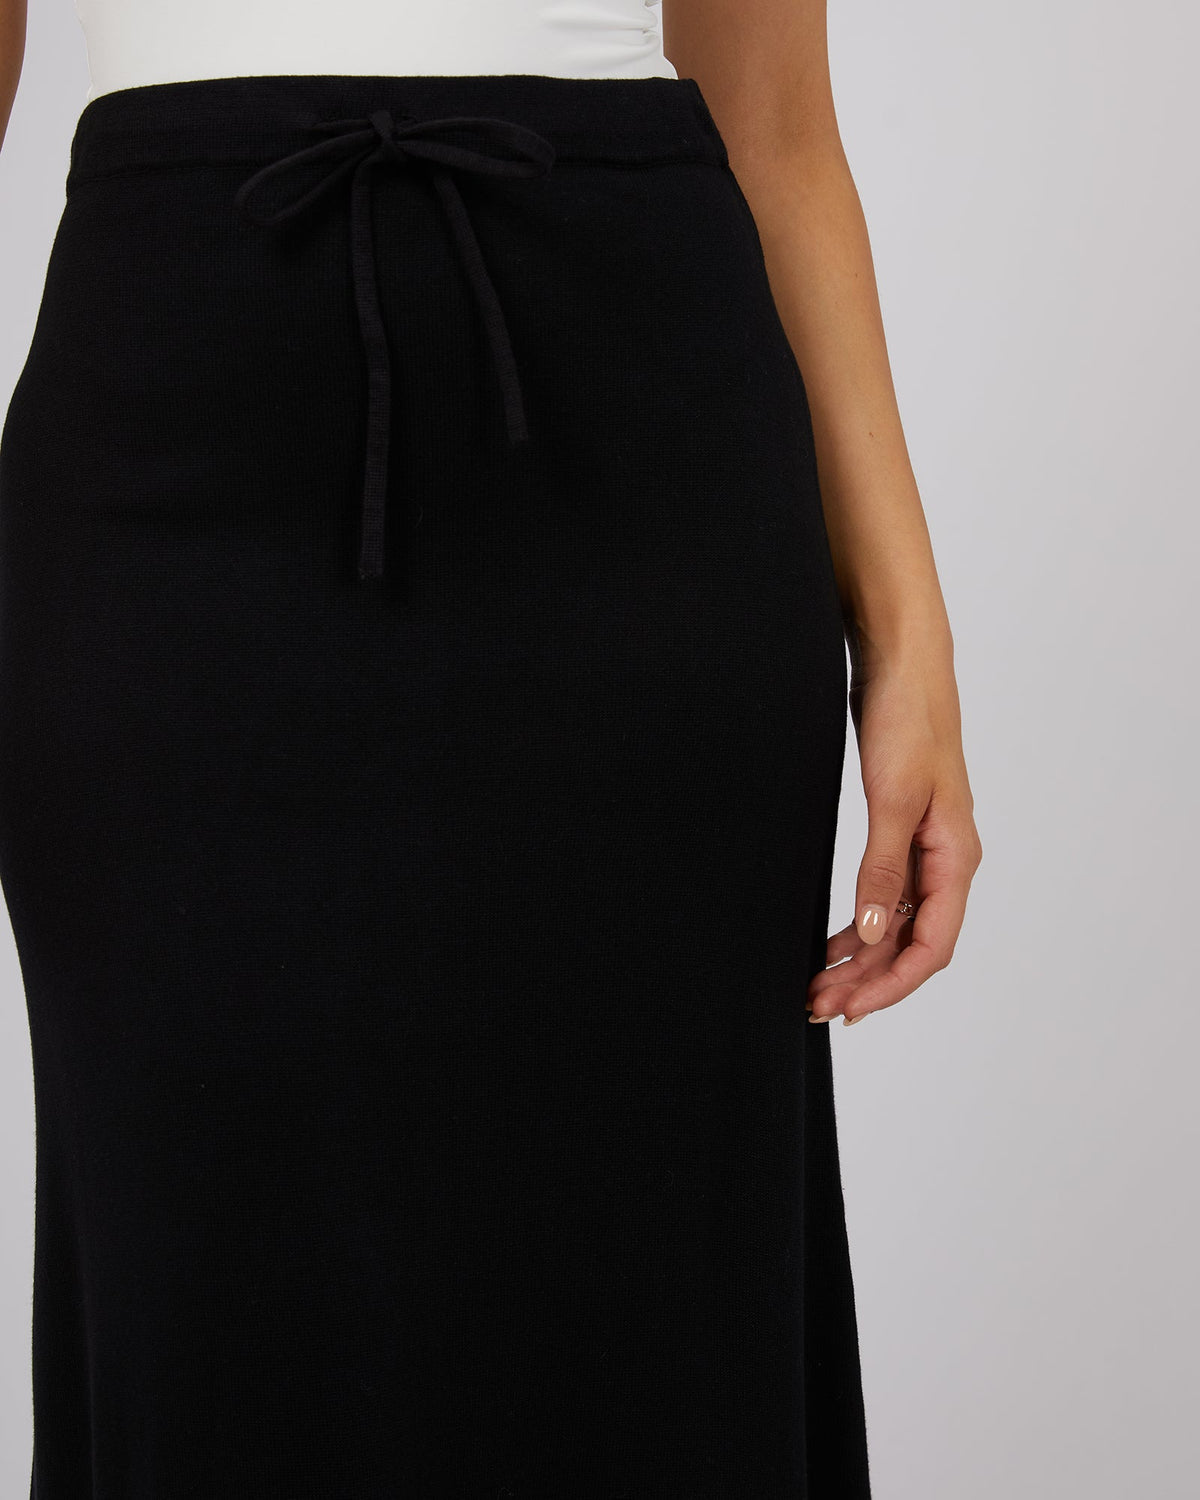 All About Eve-Eve Knit Skirt Black-Edge Clothing